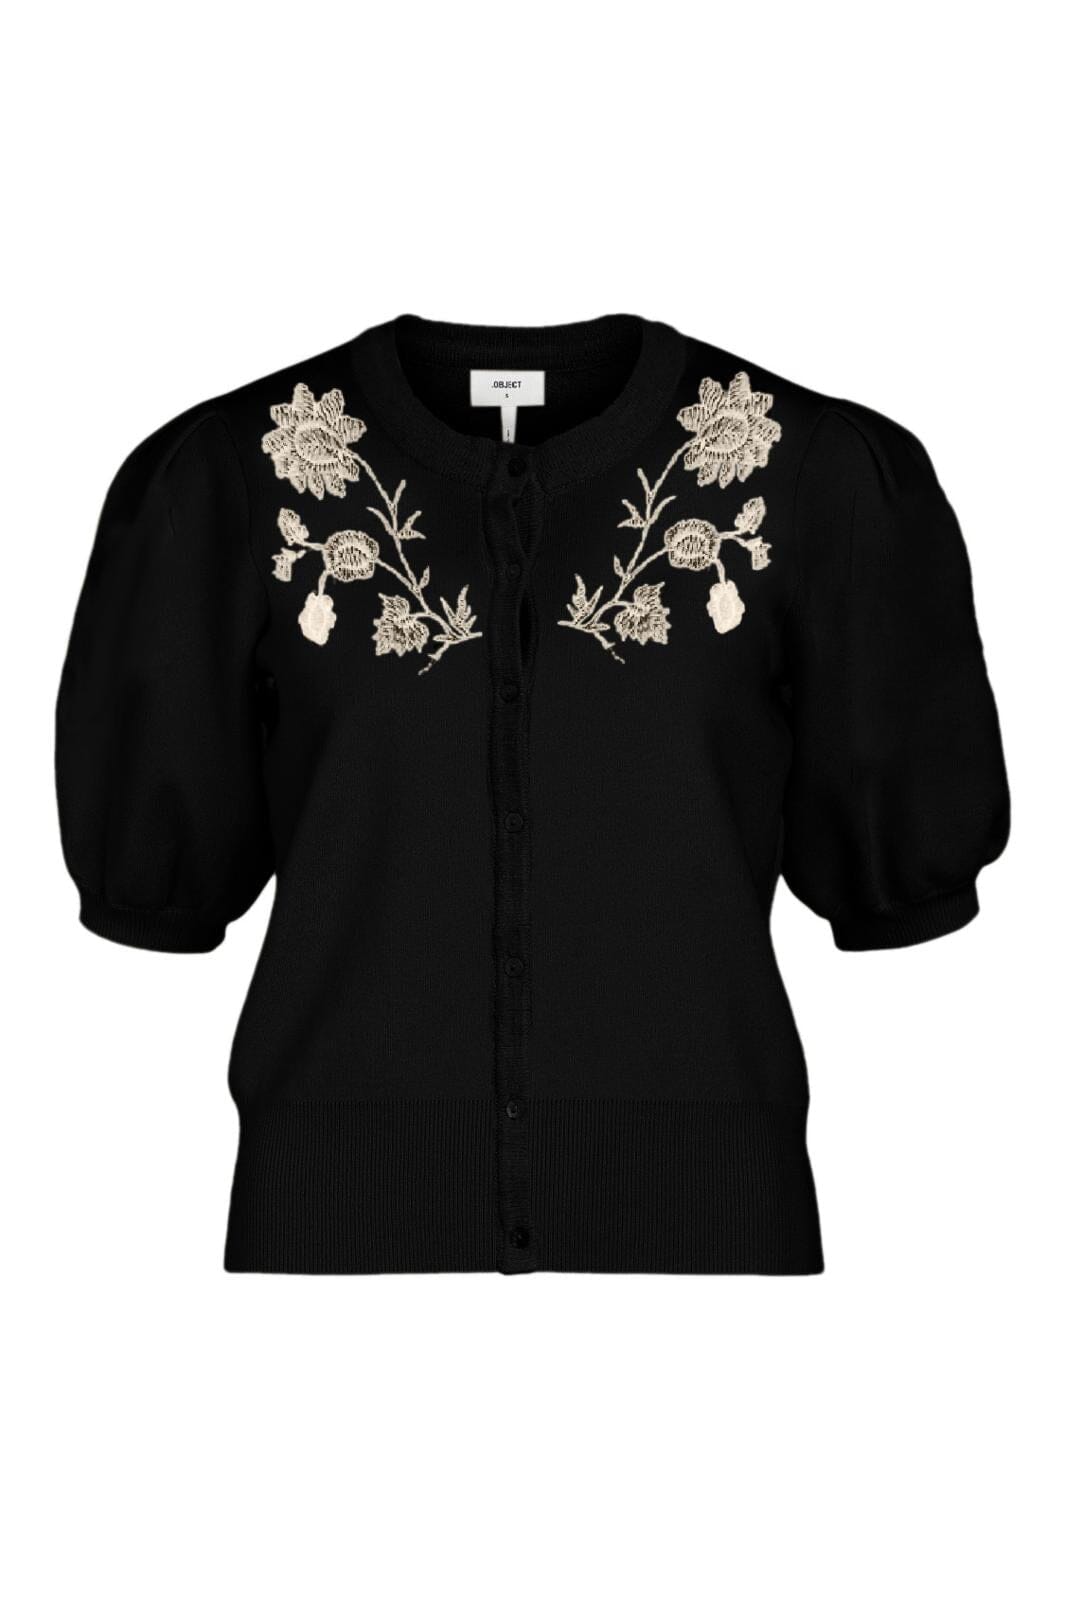 Object - Objthess S/S Knit Embroidery Cardigan - 4560441 Black Sandshell Embroidery